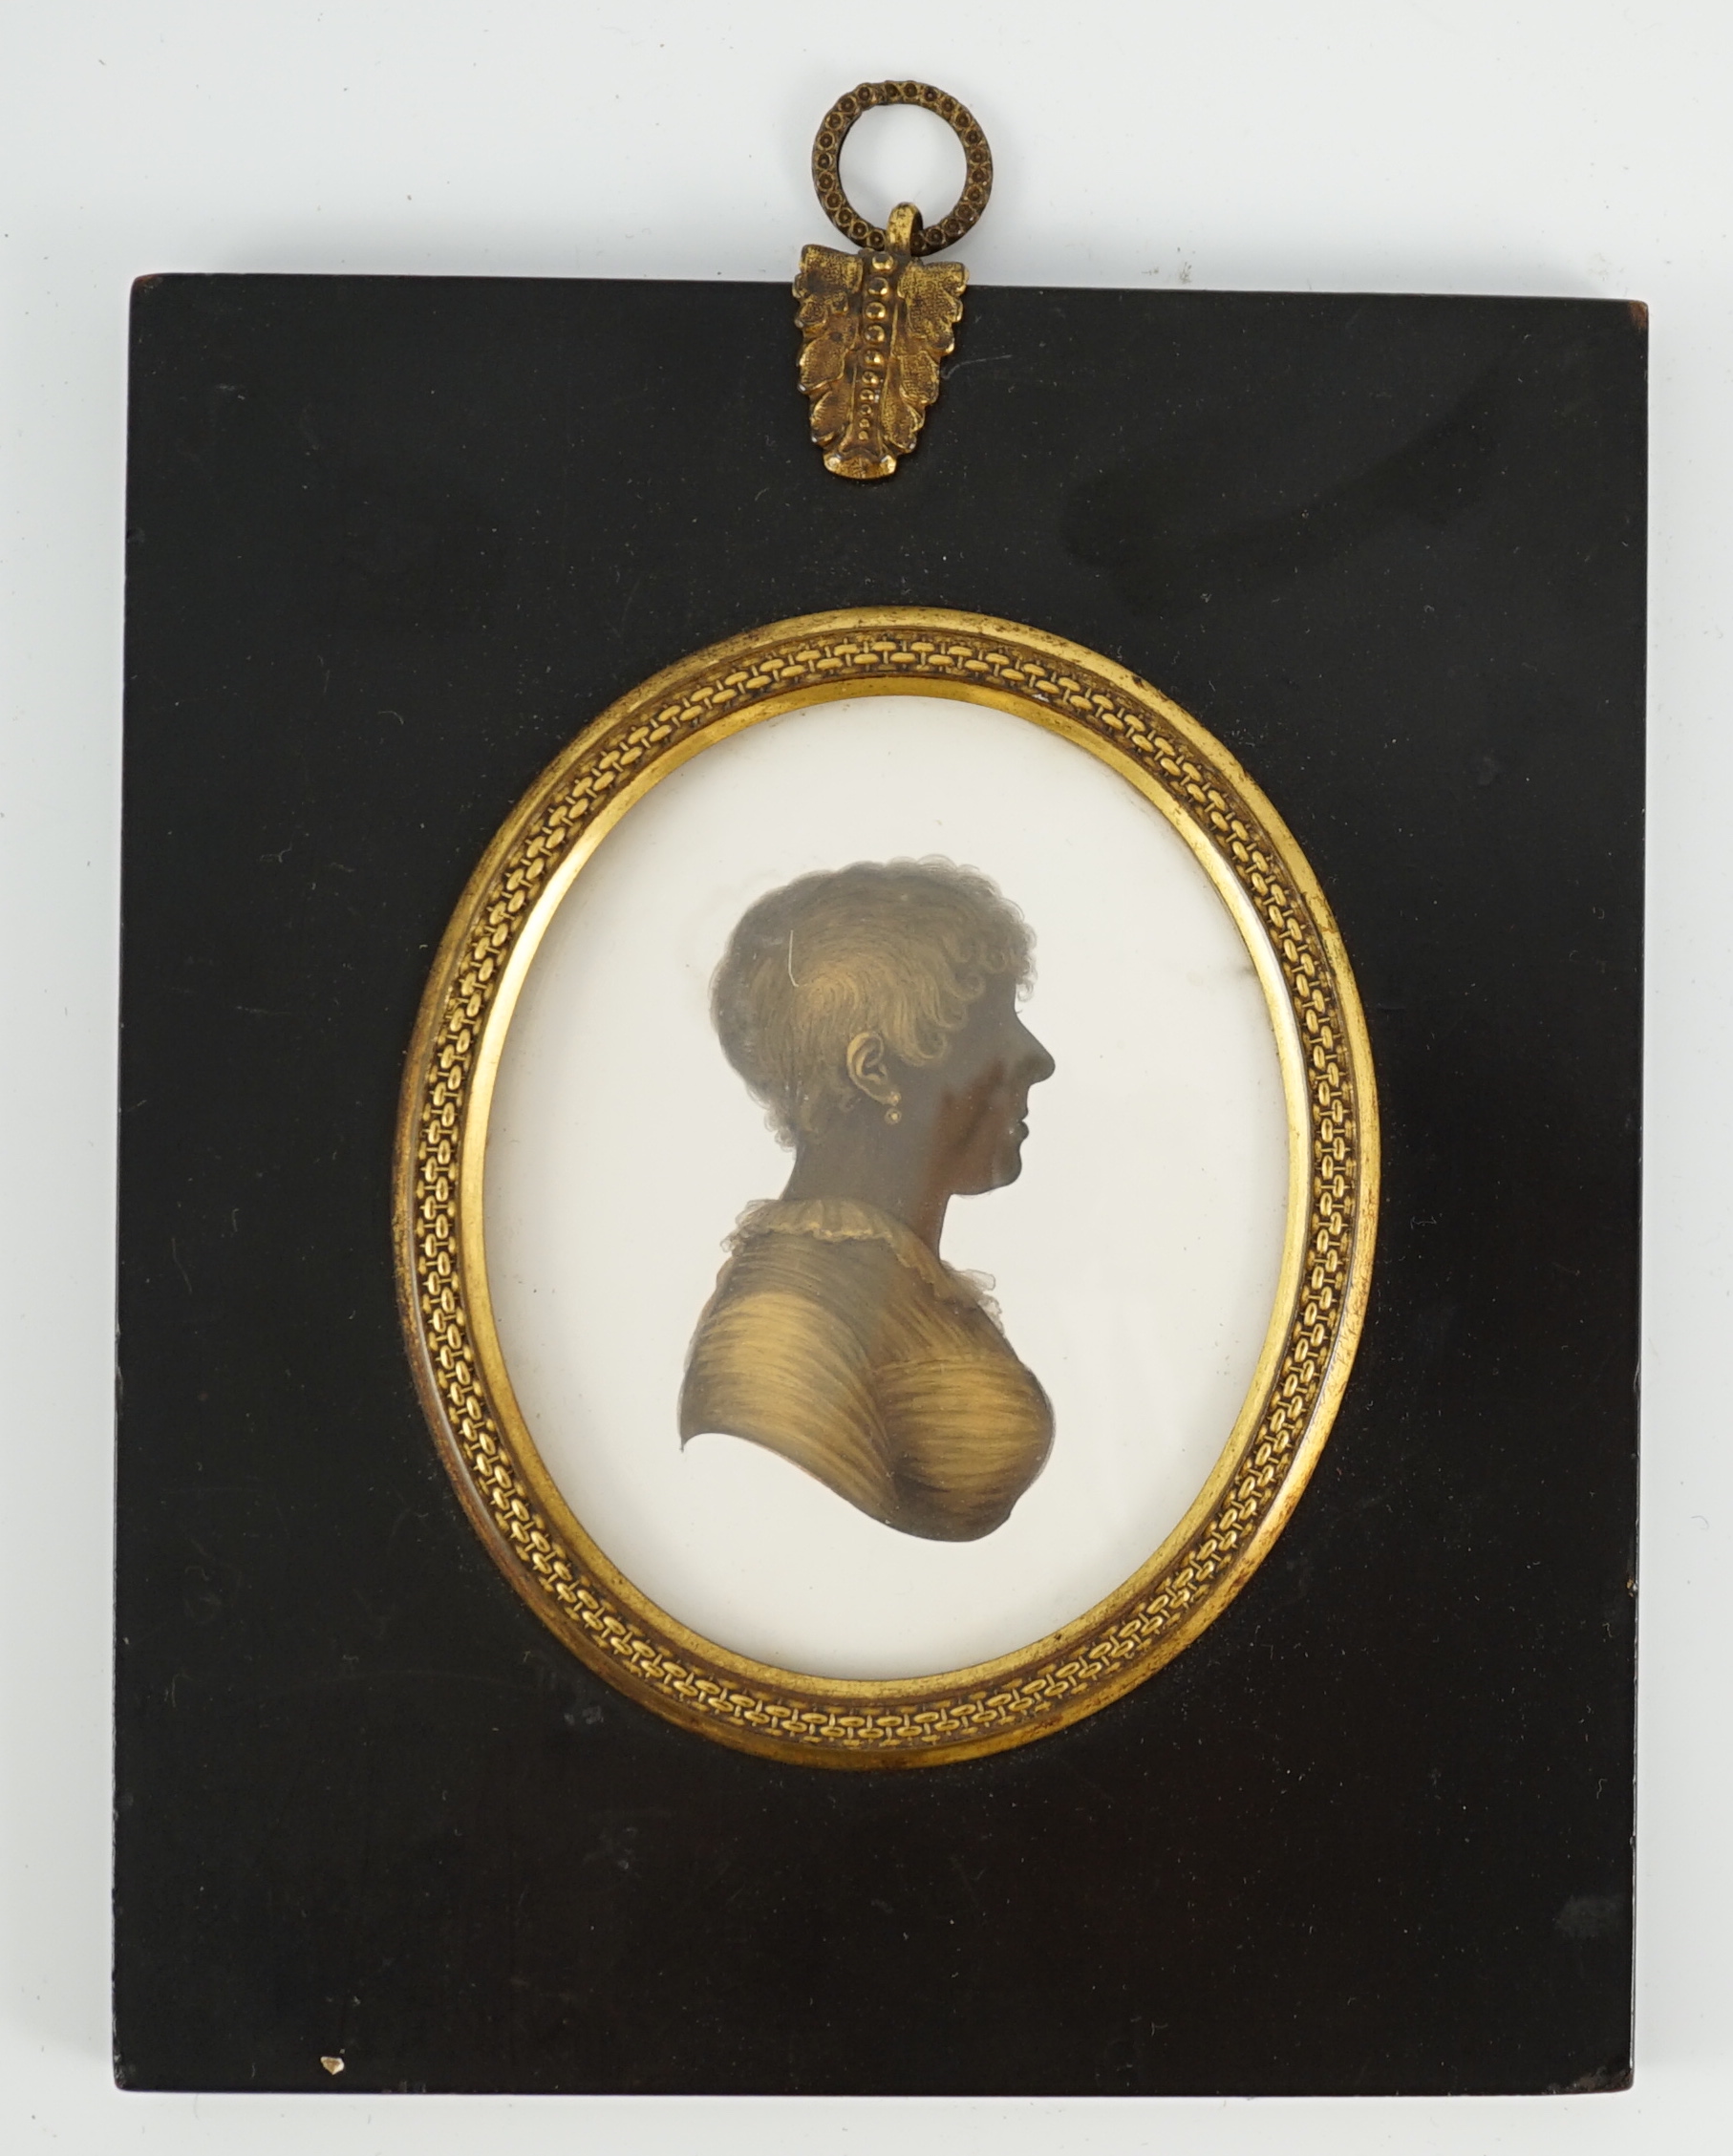 John Miers (1752-1821), Silhouette of the Countess of Clarendon, painted and bronzed plaster, 8 x 6.5cm.